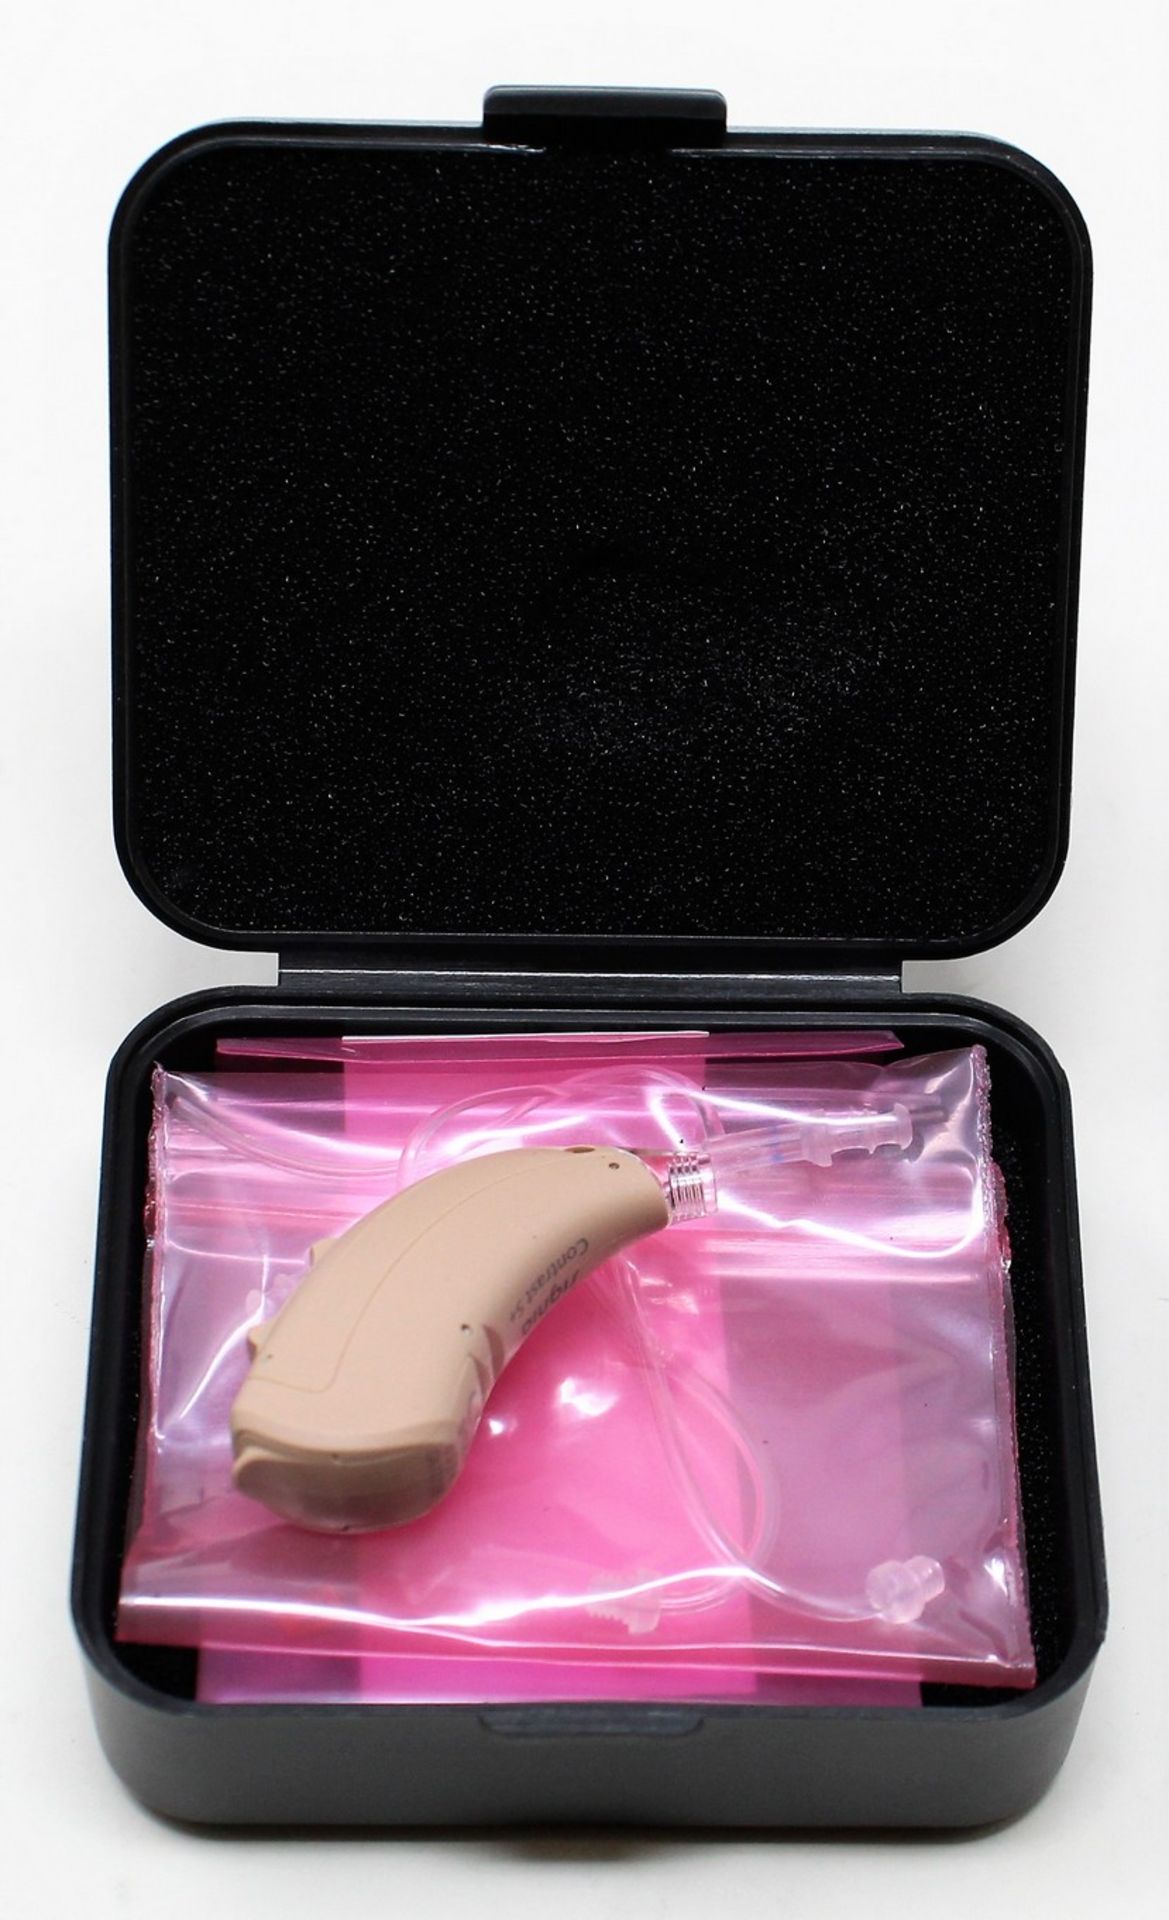 An as new Signia Contrast S+ Hearing Aid in Beige (REF: 10949268).